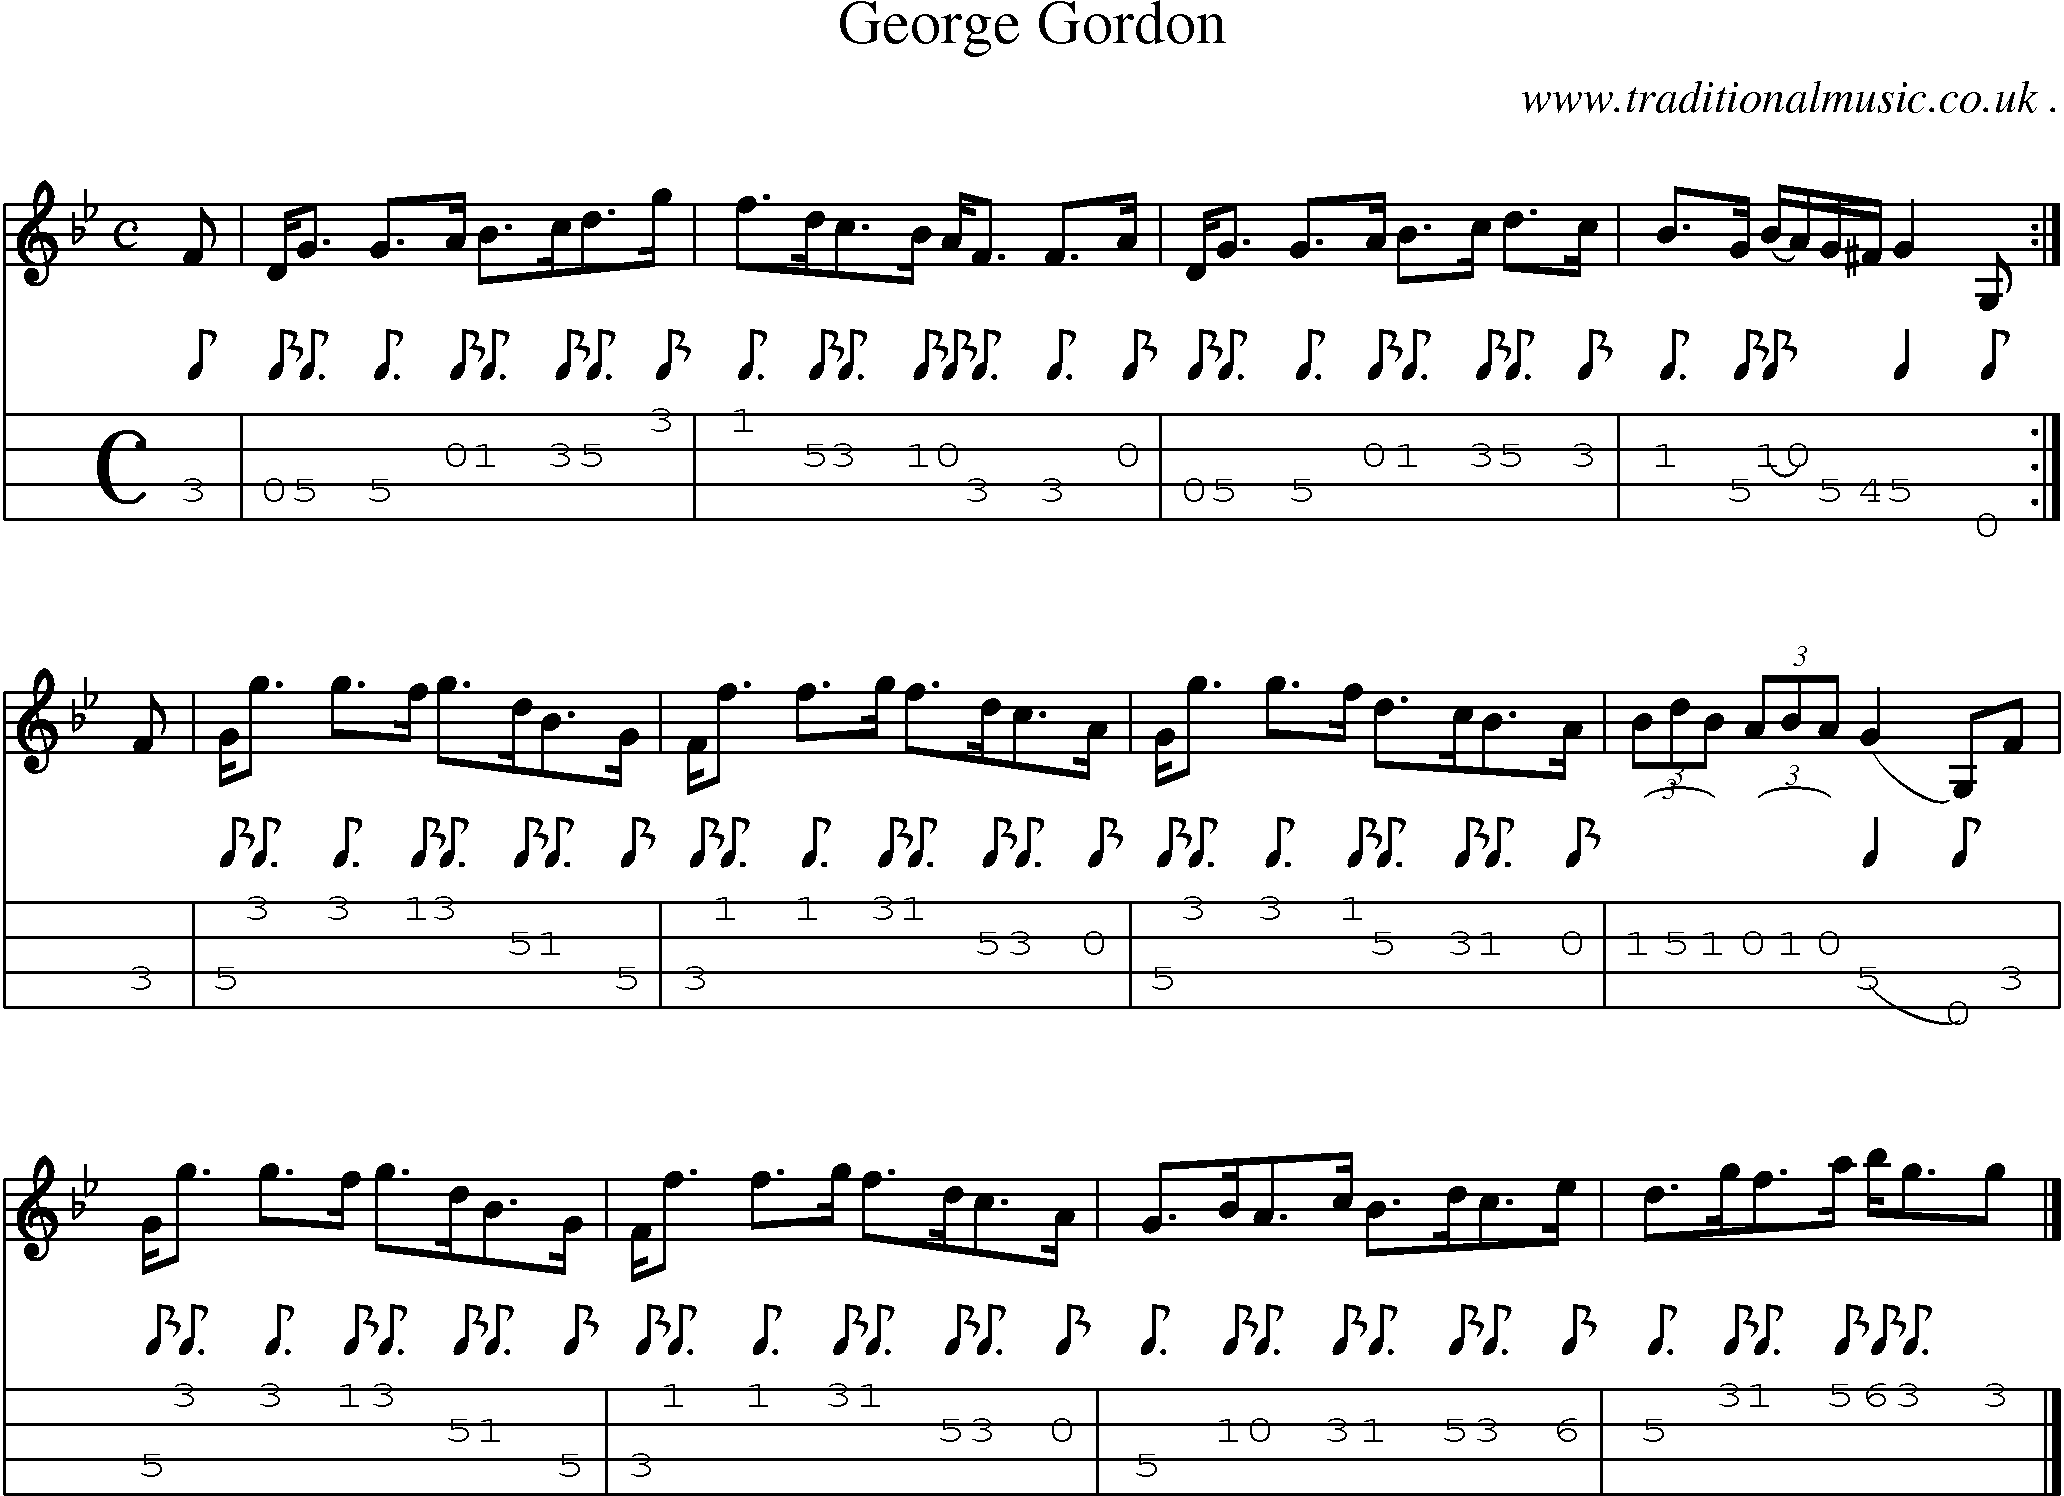 Sheet-music  score, Chords and Mandolin Tabs for George Gordon